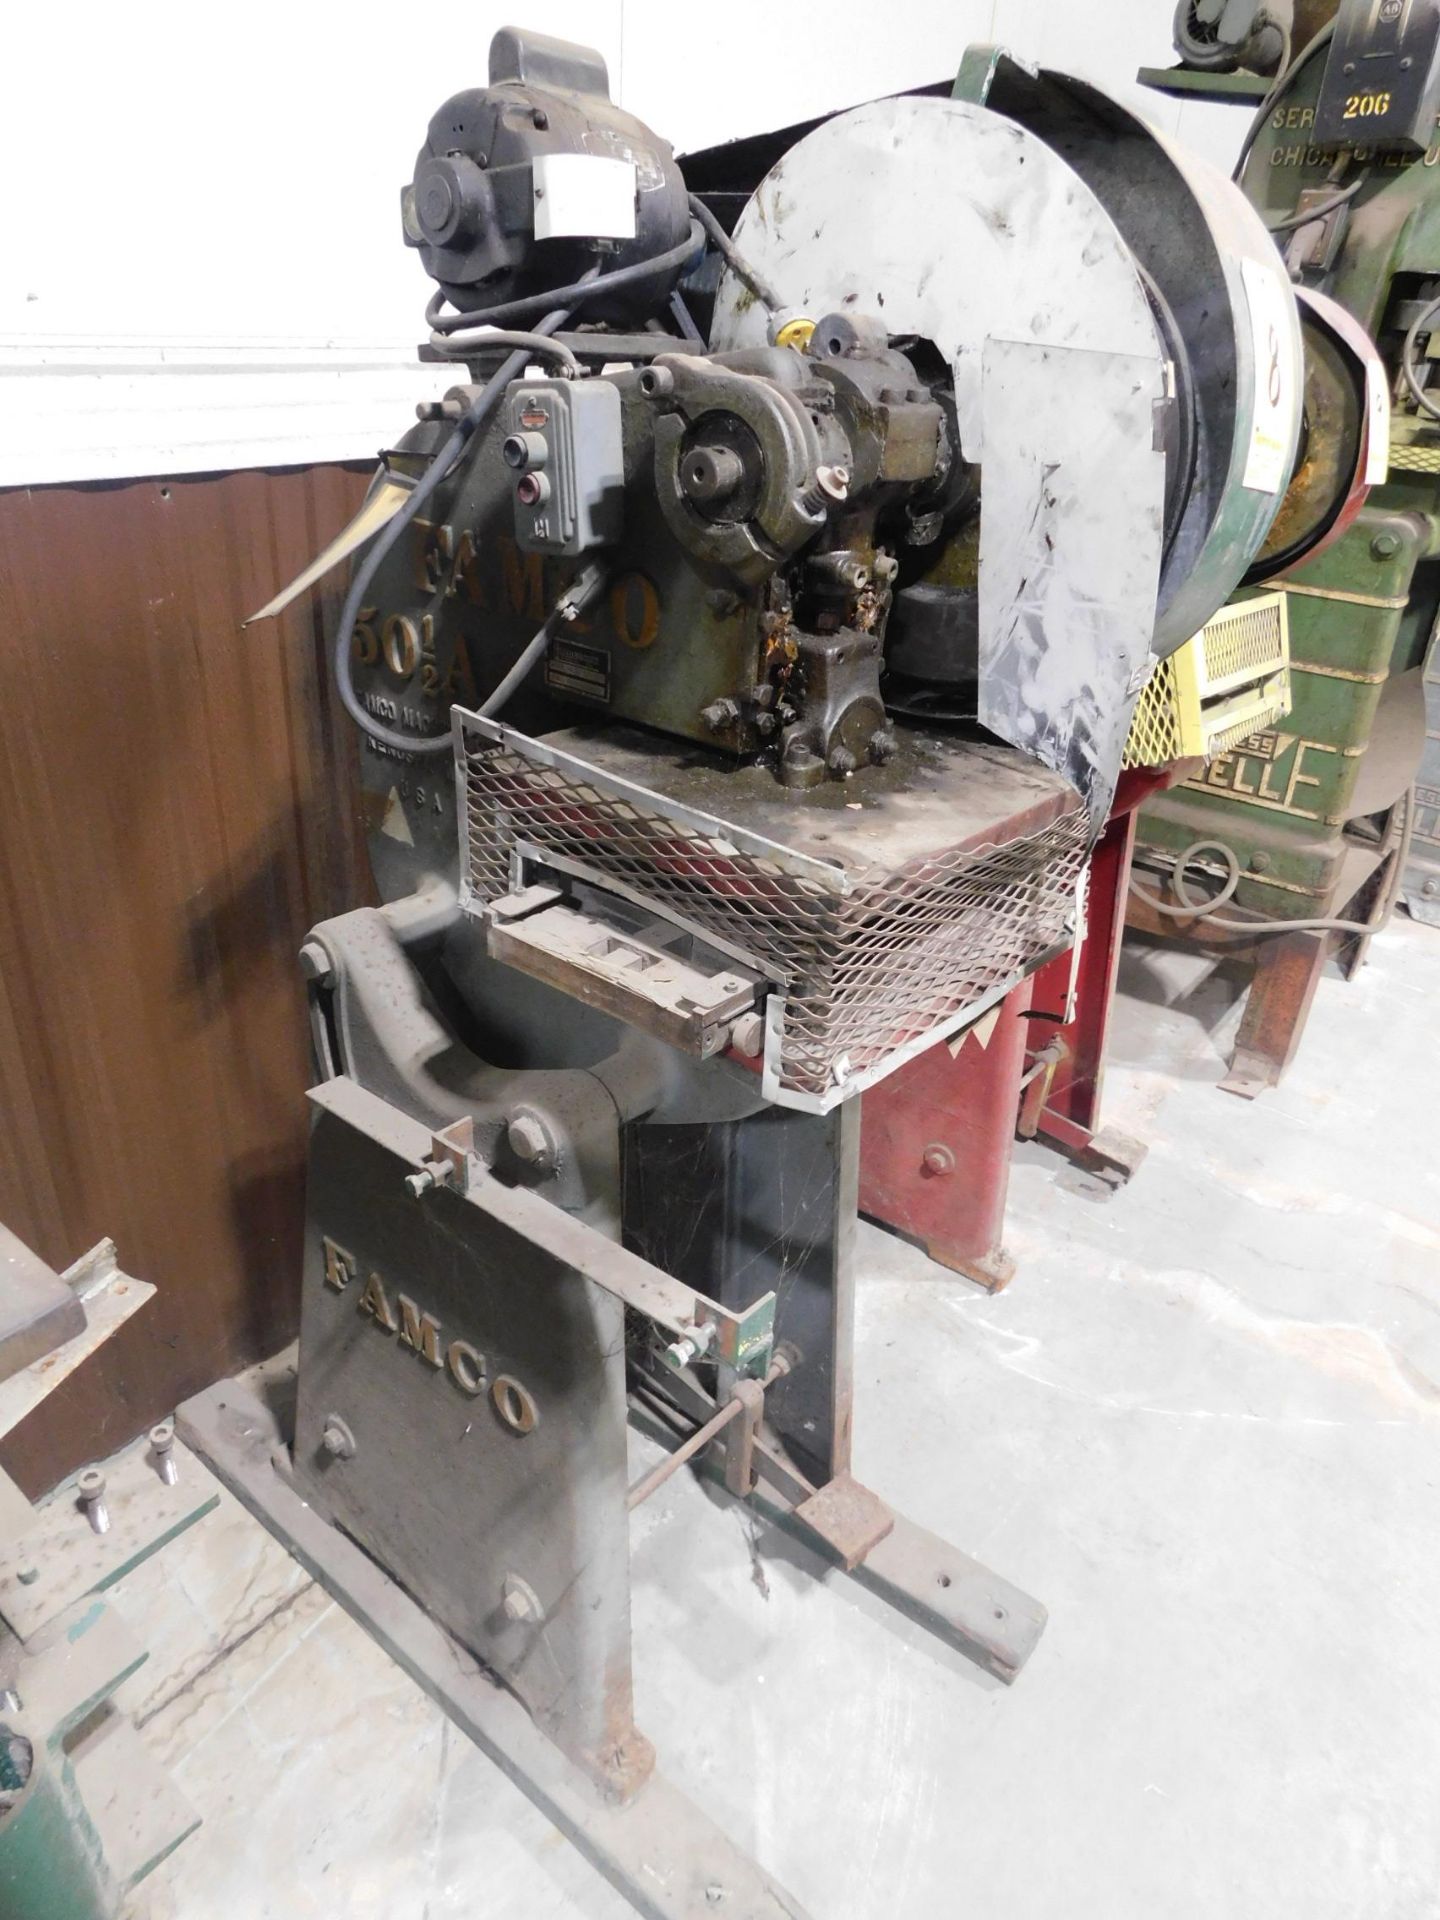 Famco Model 50 1/2A Punch Press, SN P-D7UUU61